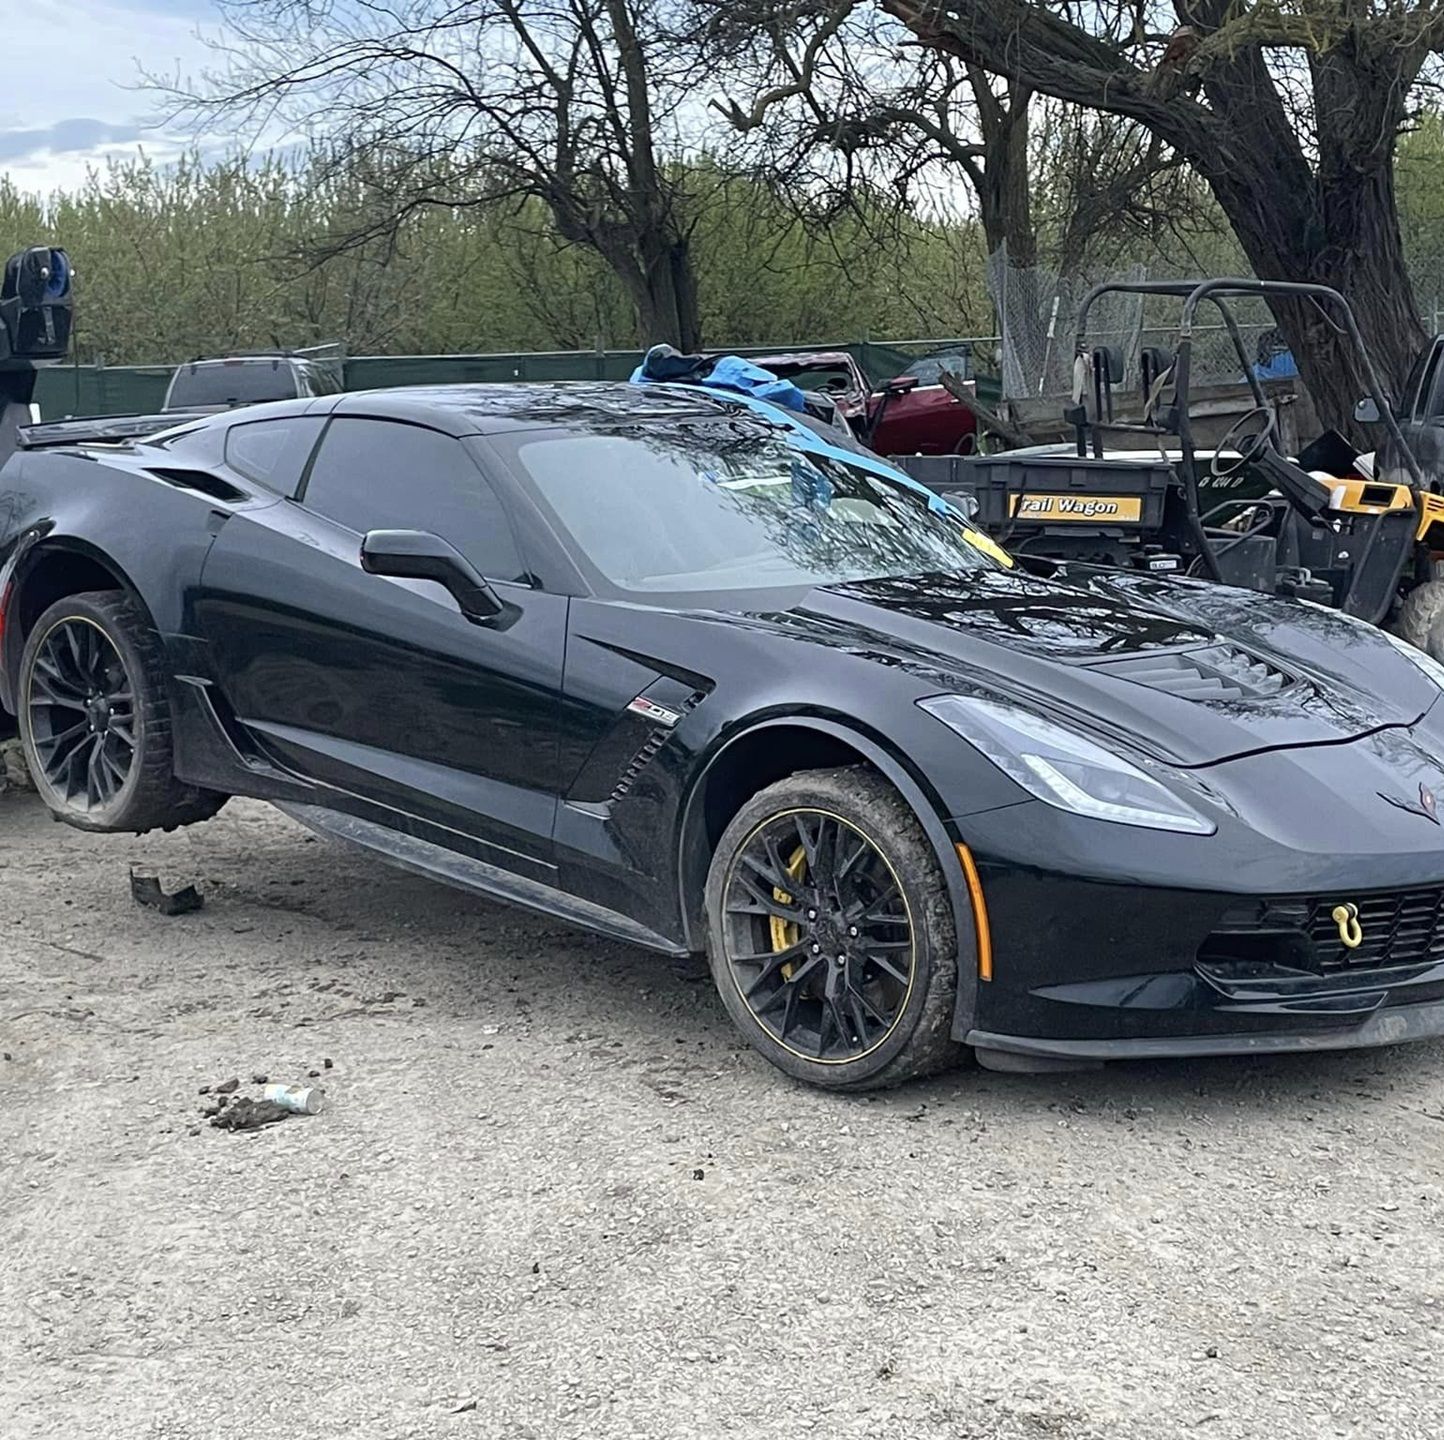 Three Arrested, $600,000 Worth of Corvettes and Camaros Recovered in California 'Chop-Shop' Raid